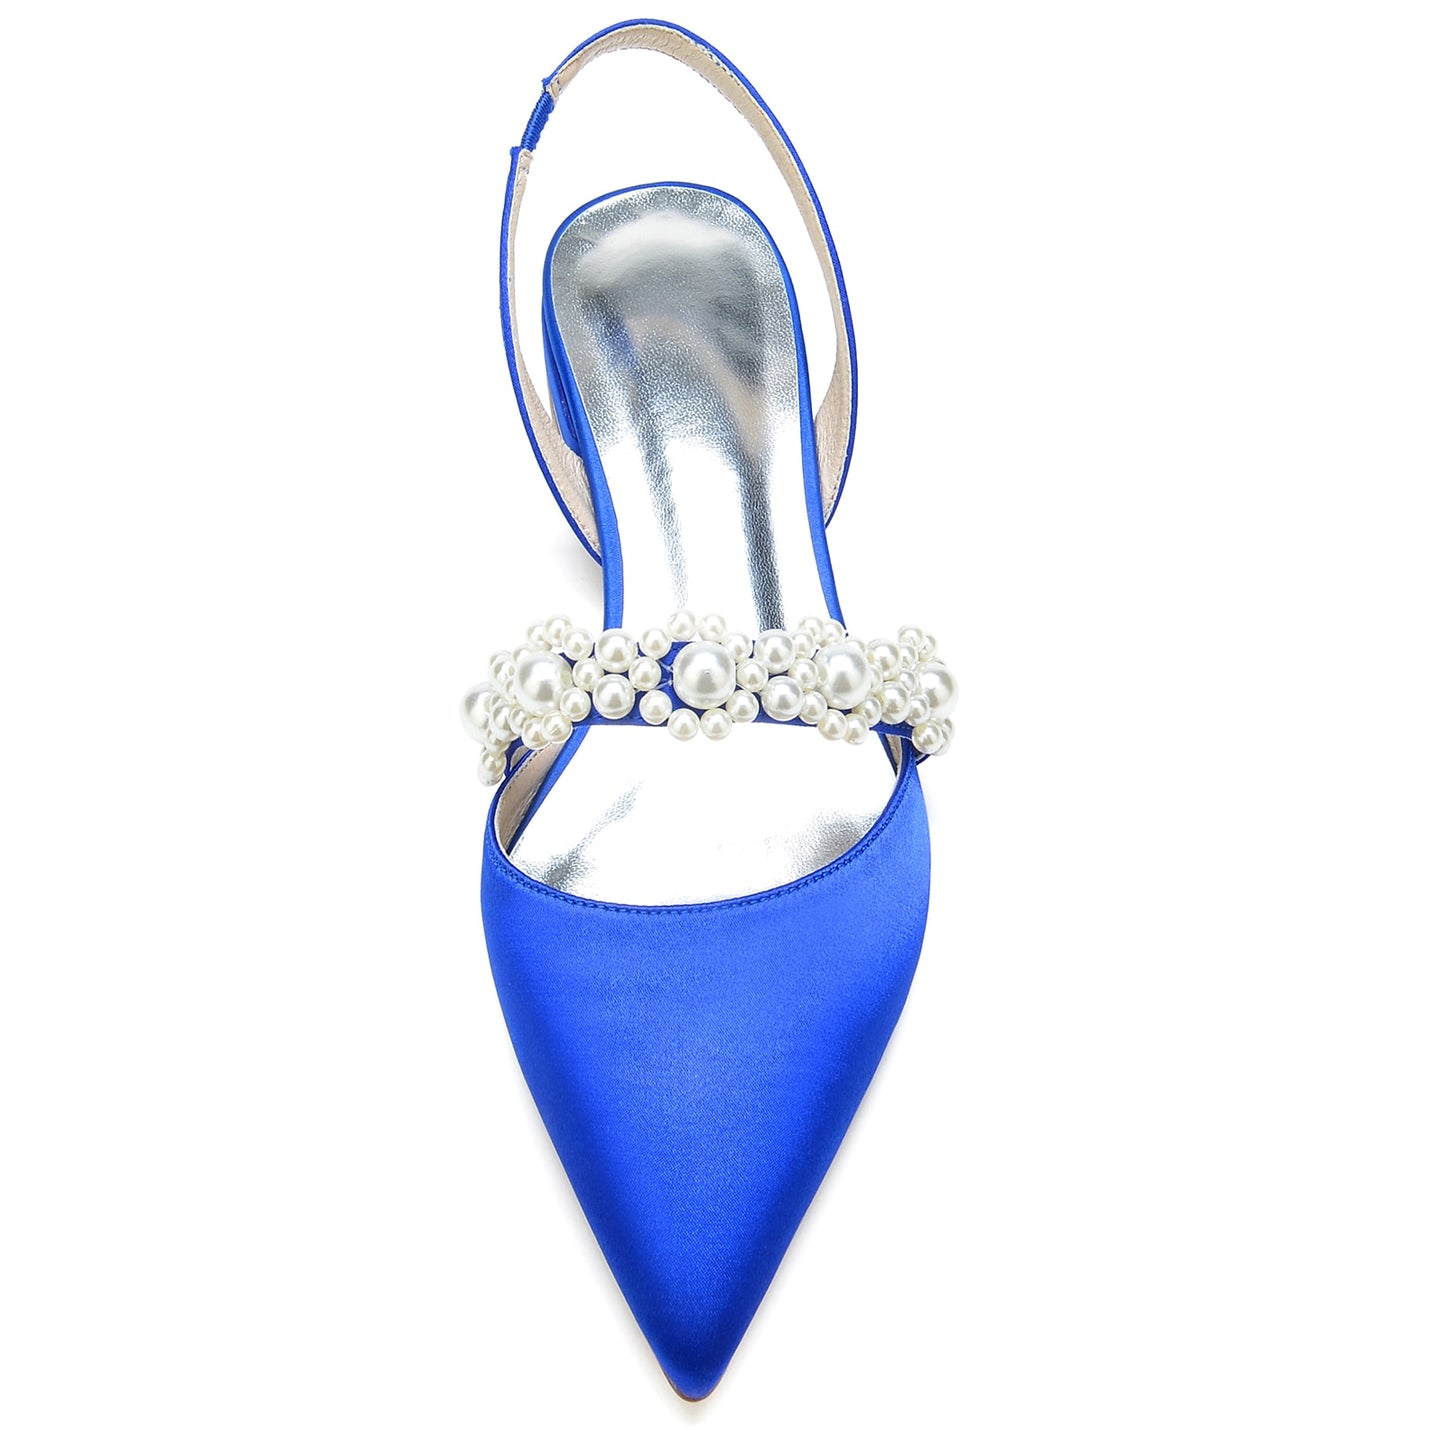 Pearls Strap Elegant Bridal Wedding Party Cocktail Shoes